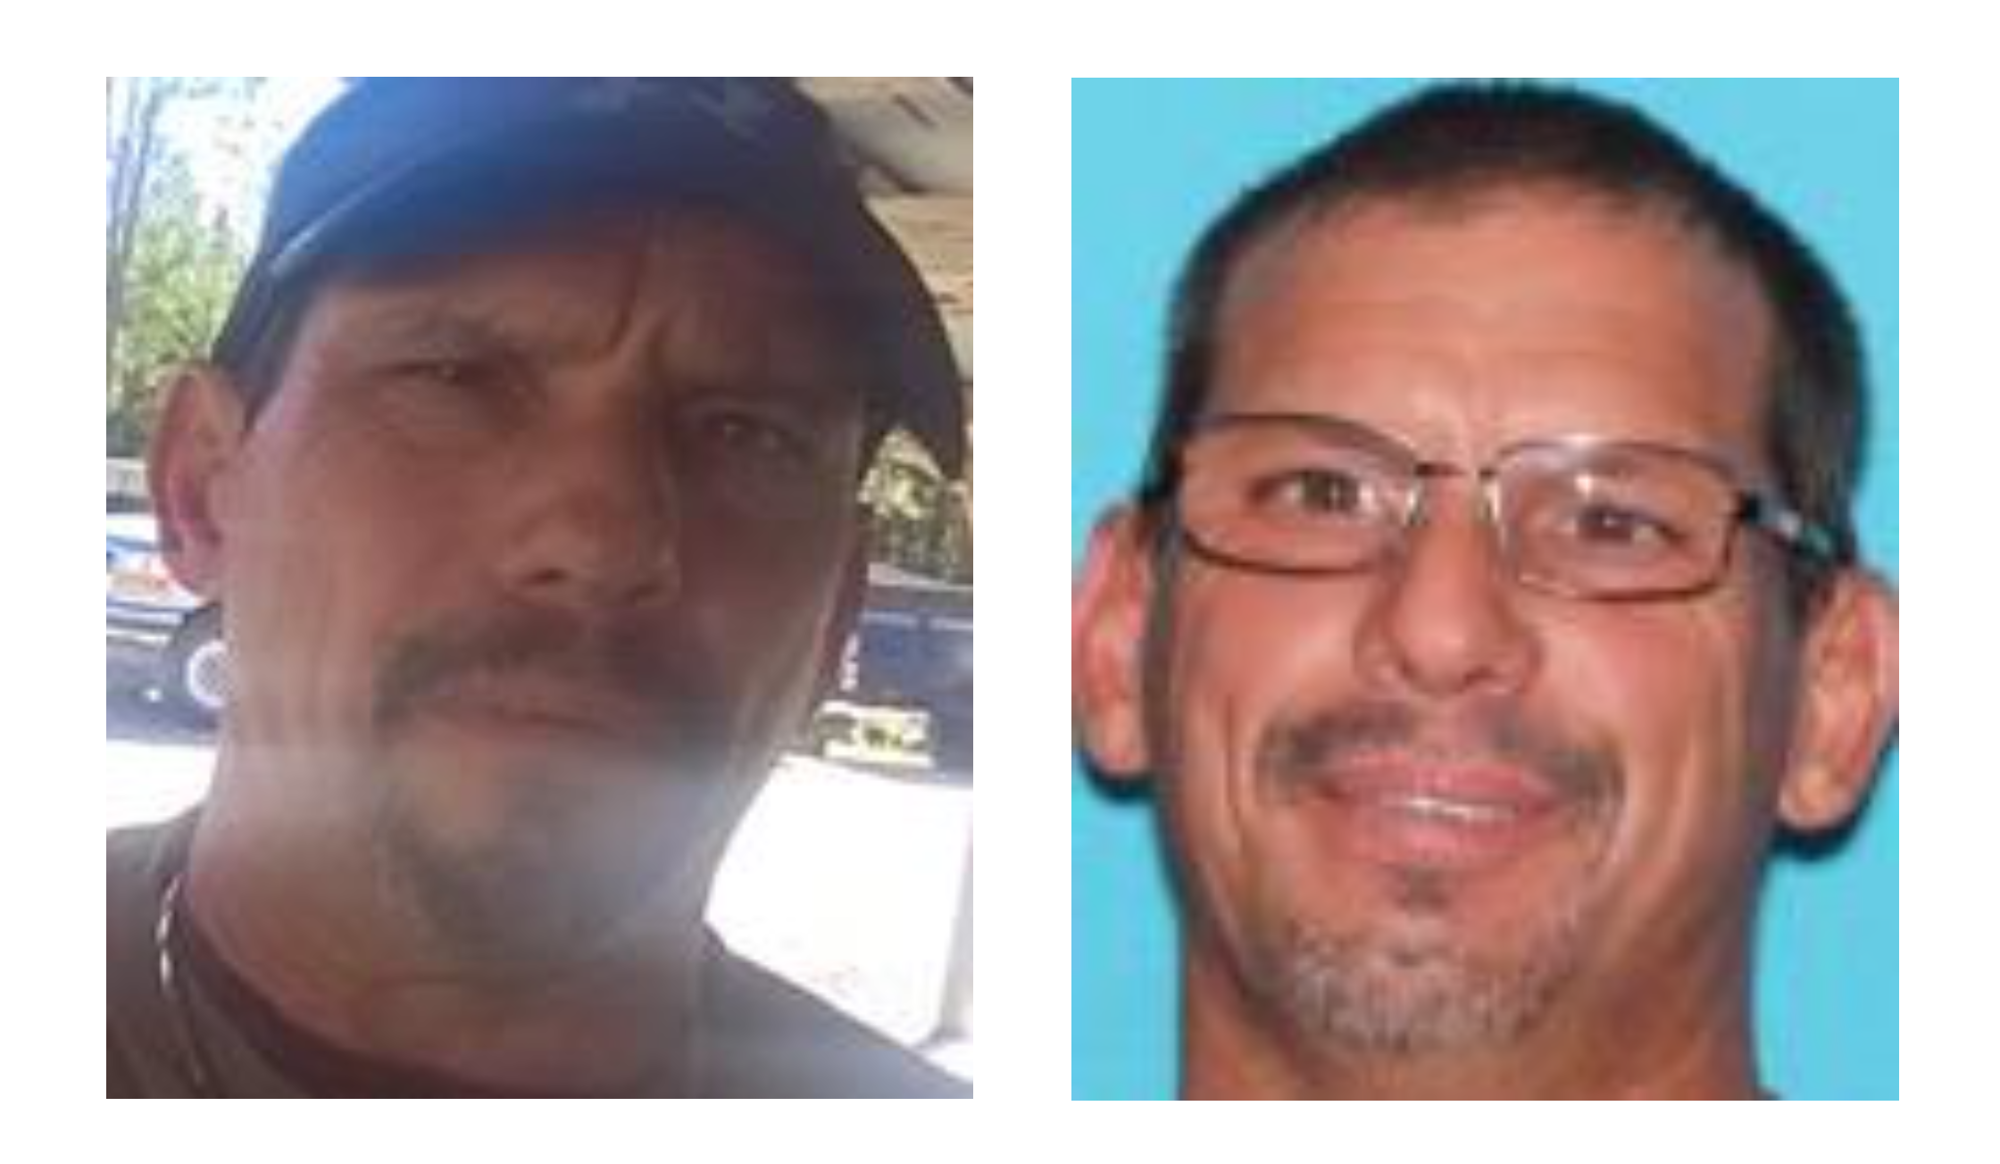 Charles Singer, 48, had previously been reported missing. (Photo courtesy of the Flagler County Sheriff's Office.)